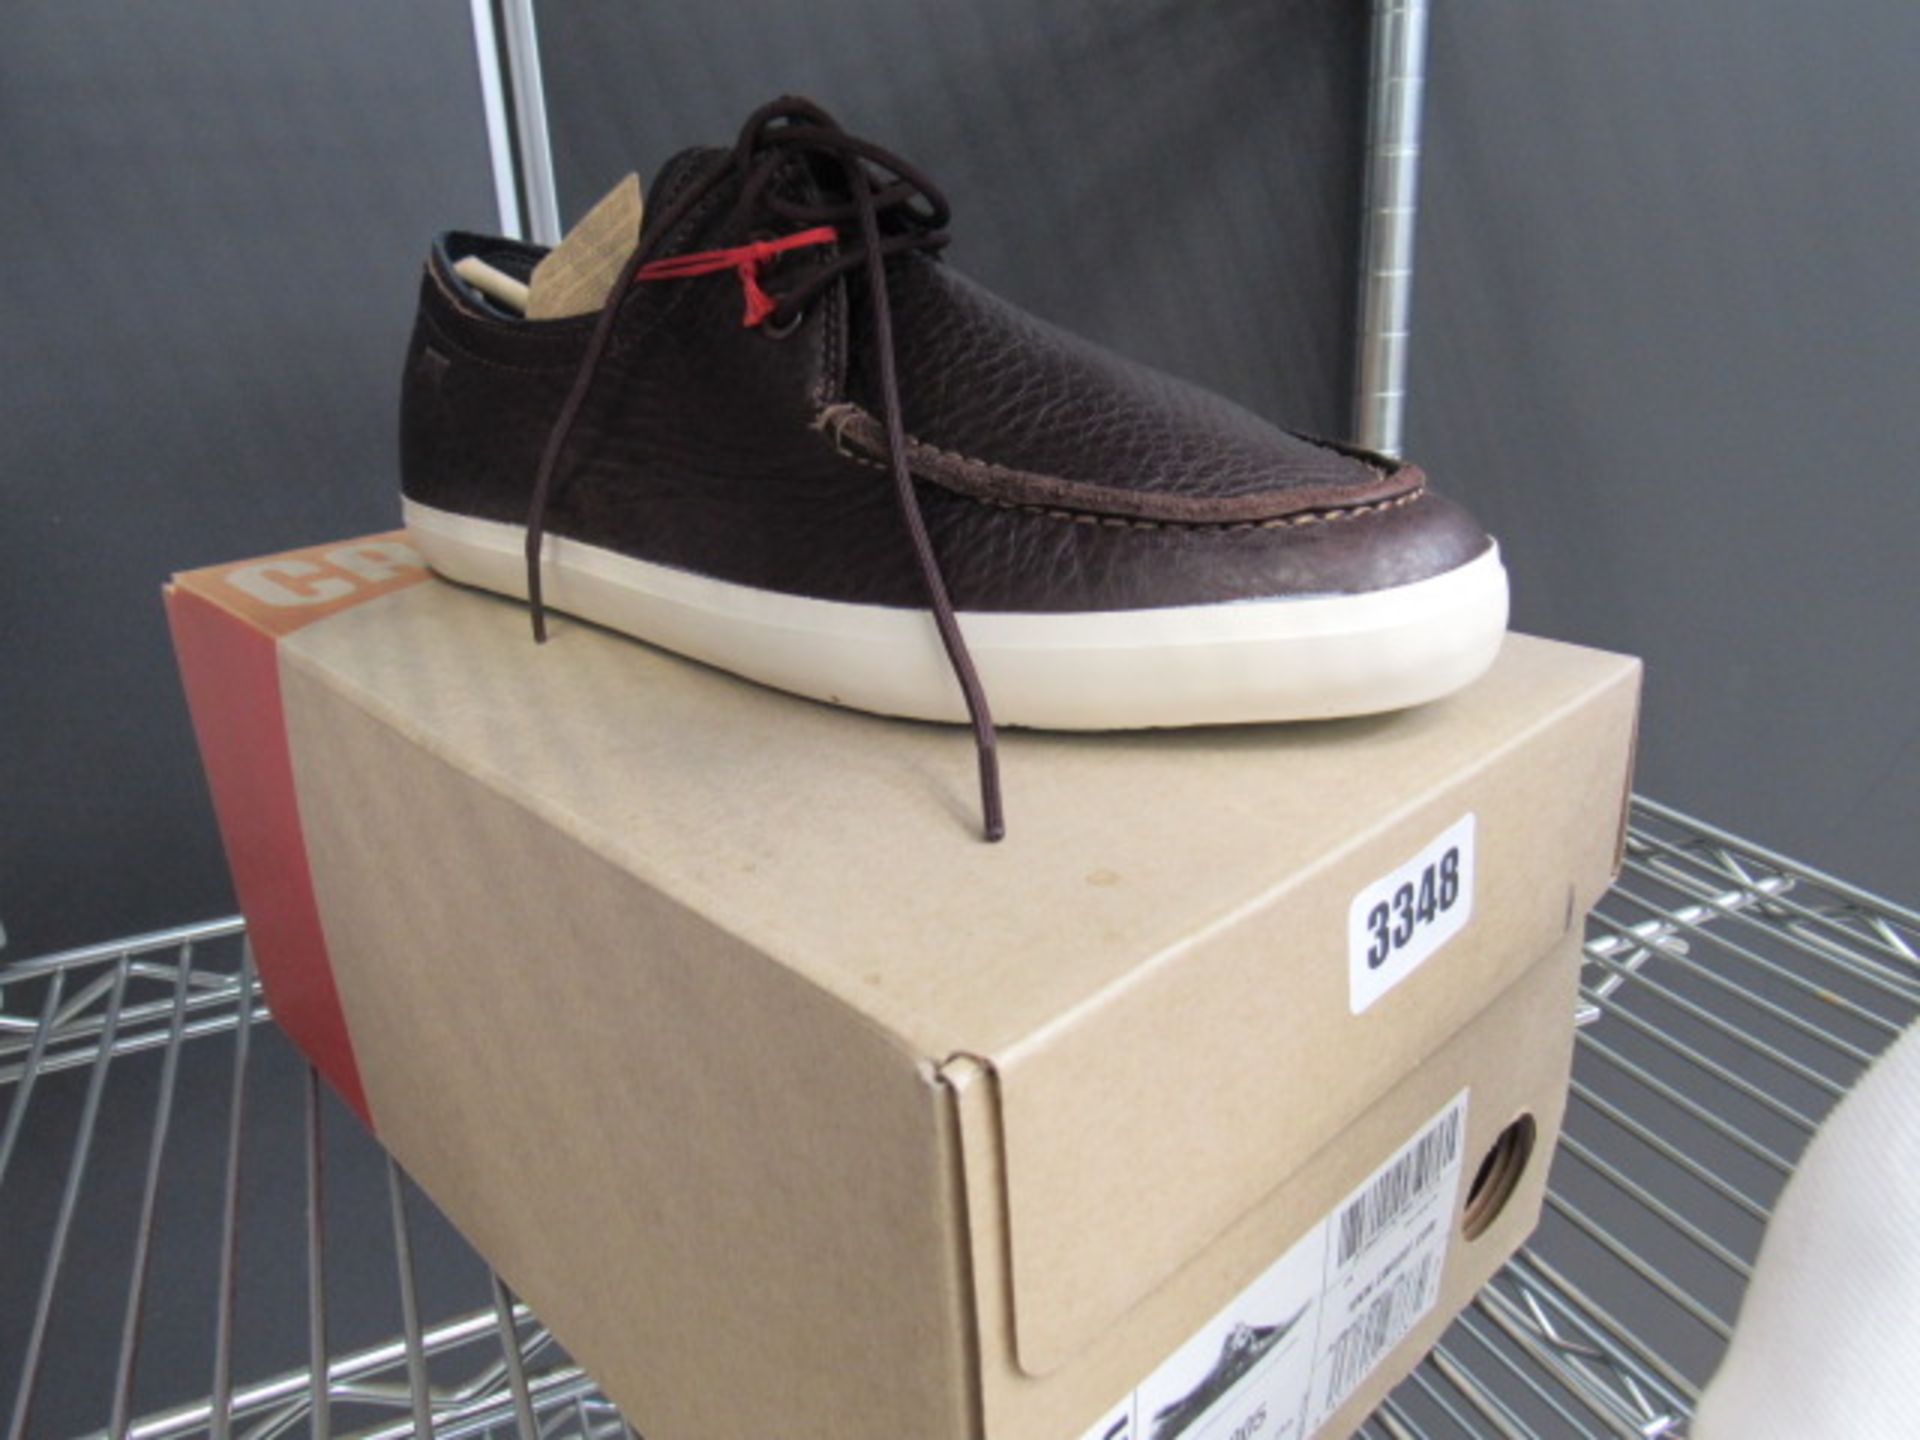 Pair of camper shoes, size 42